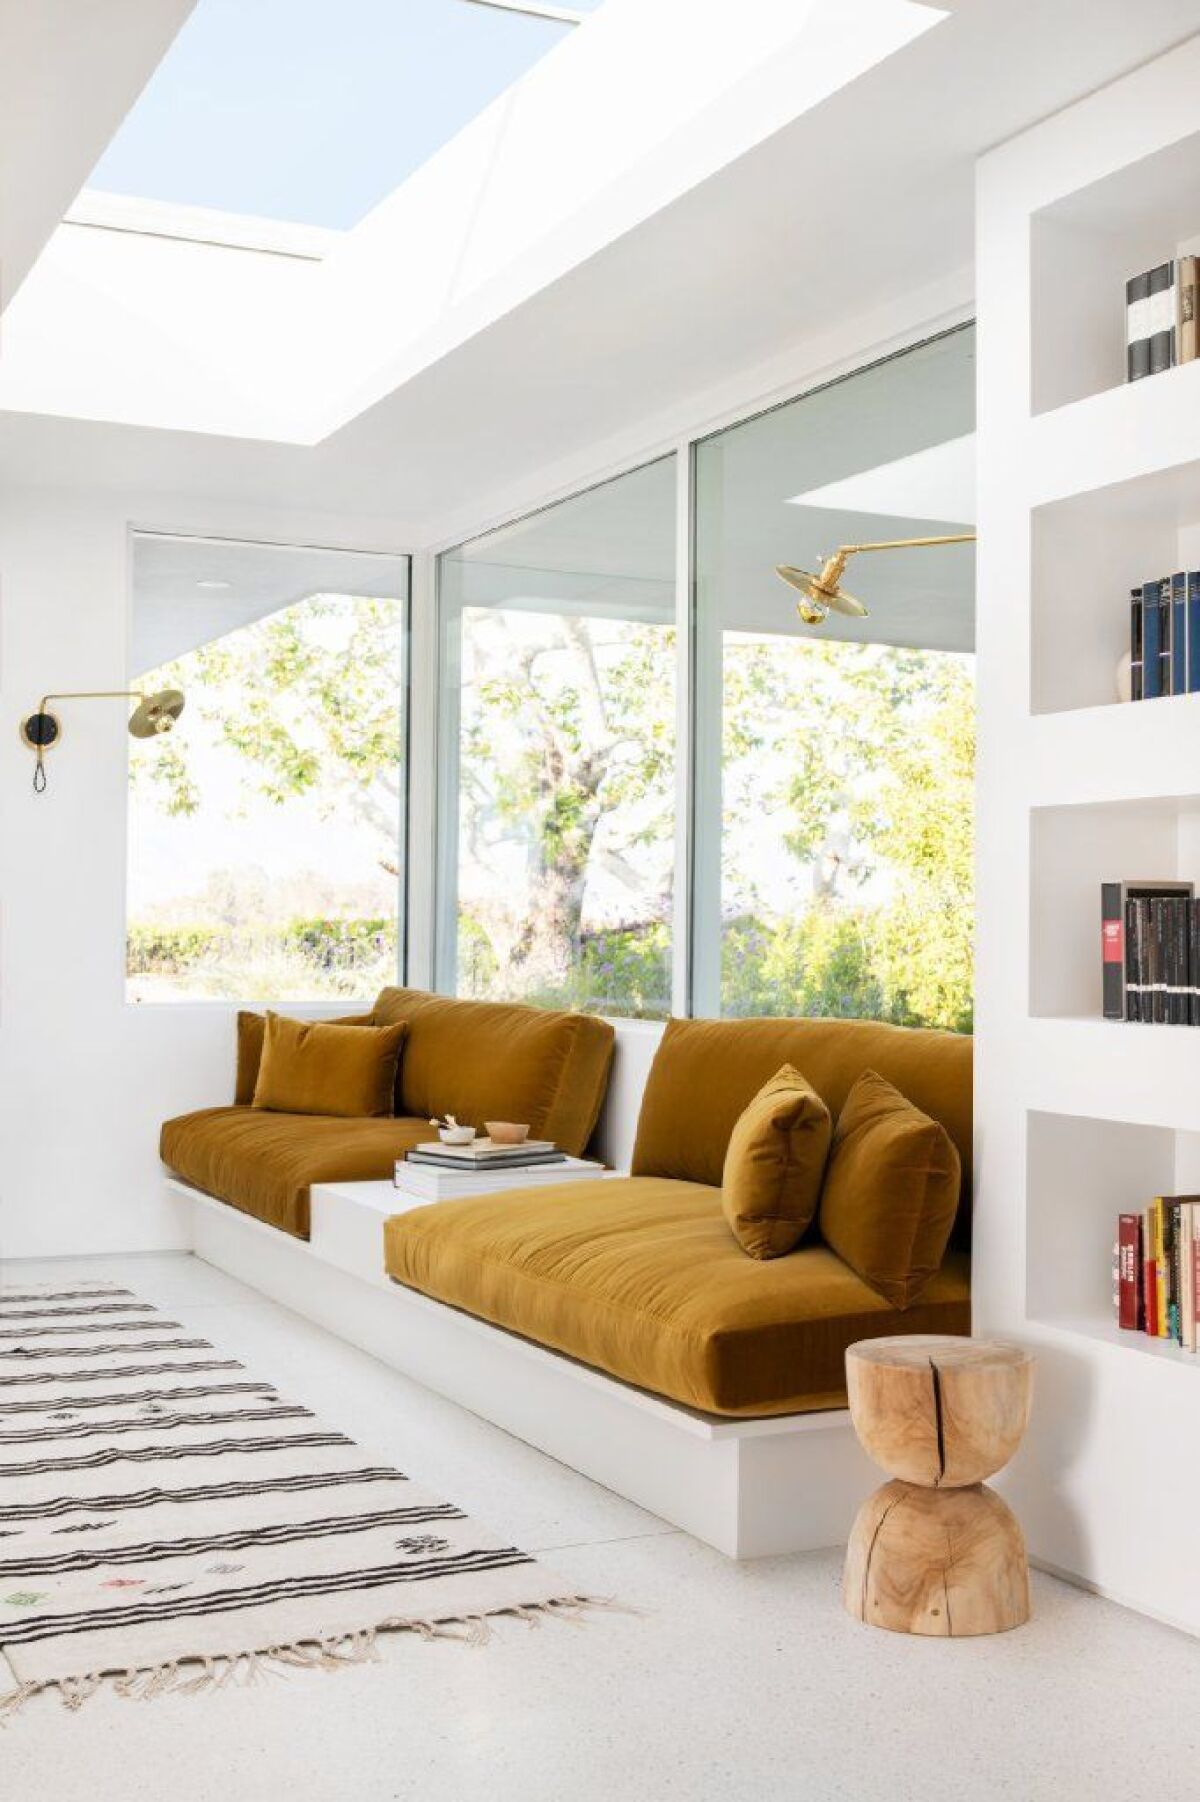 A skylight in the home of actress Mandy Moore. An old, unattractive model was replaced for $2,700, including installation.